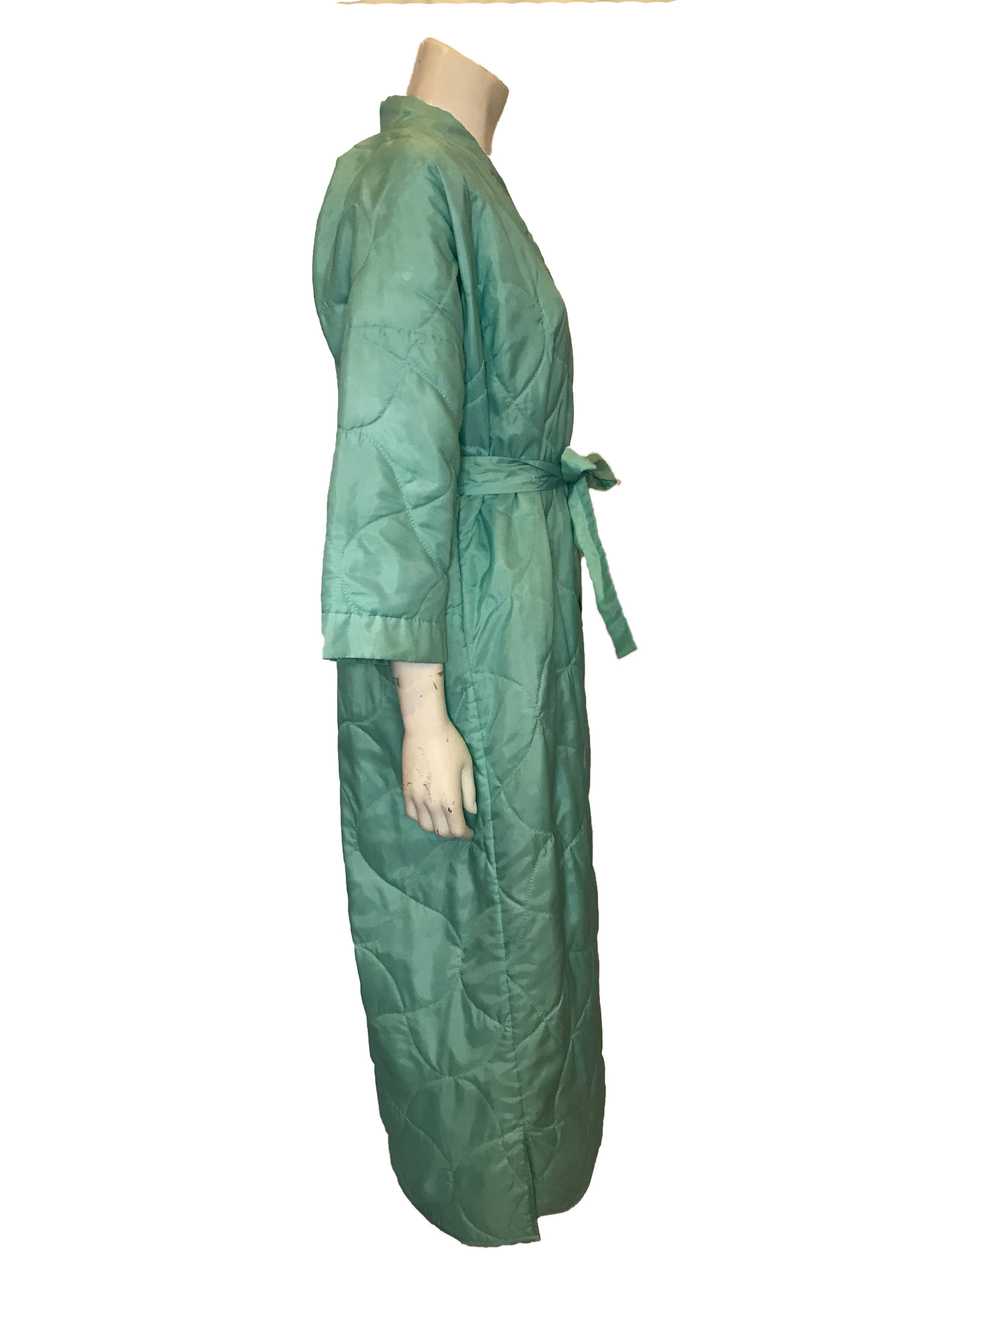 1960s Light Turquoise Quilted Robe - image 2